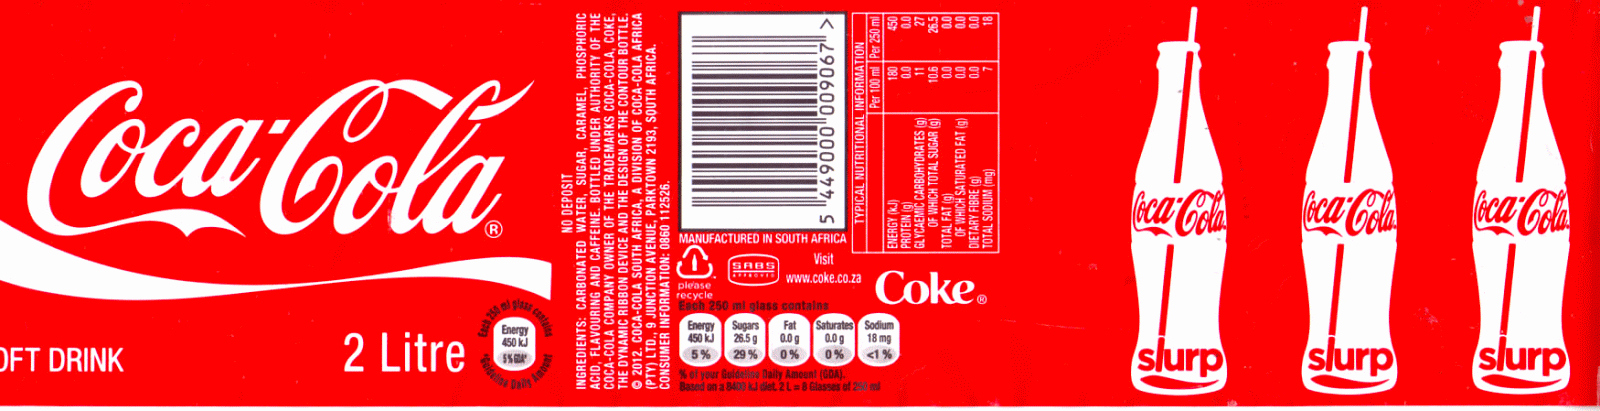 2 Liter soda Bottle Label Template Awesome Cuan S Curious Collections Local Cola Labels